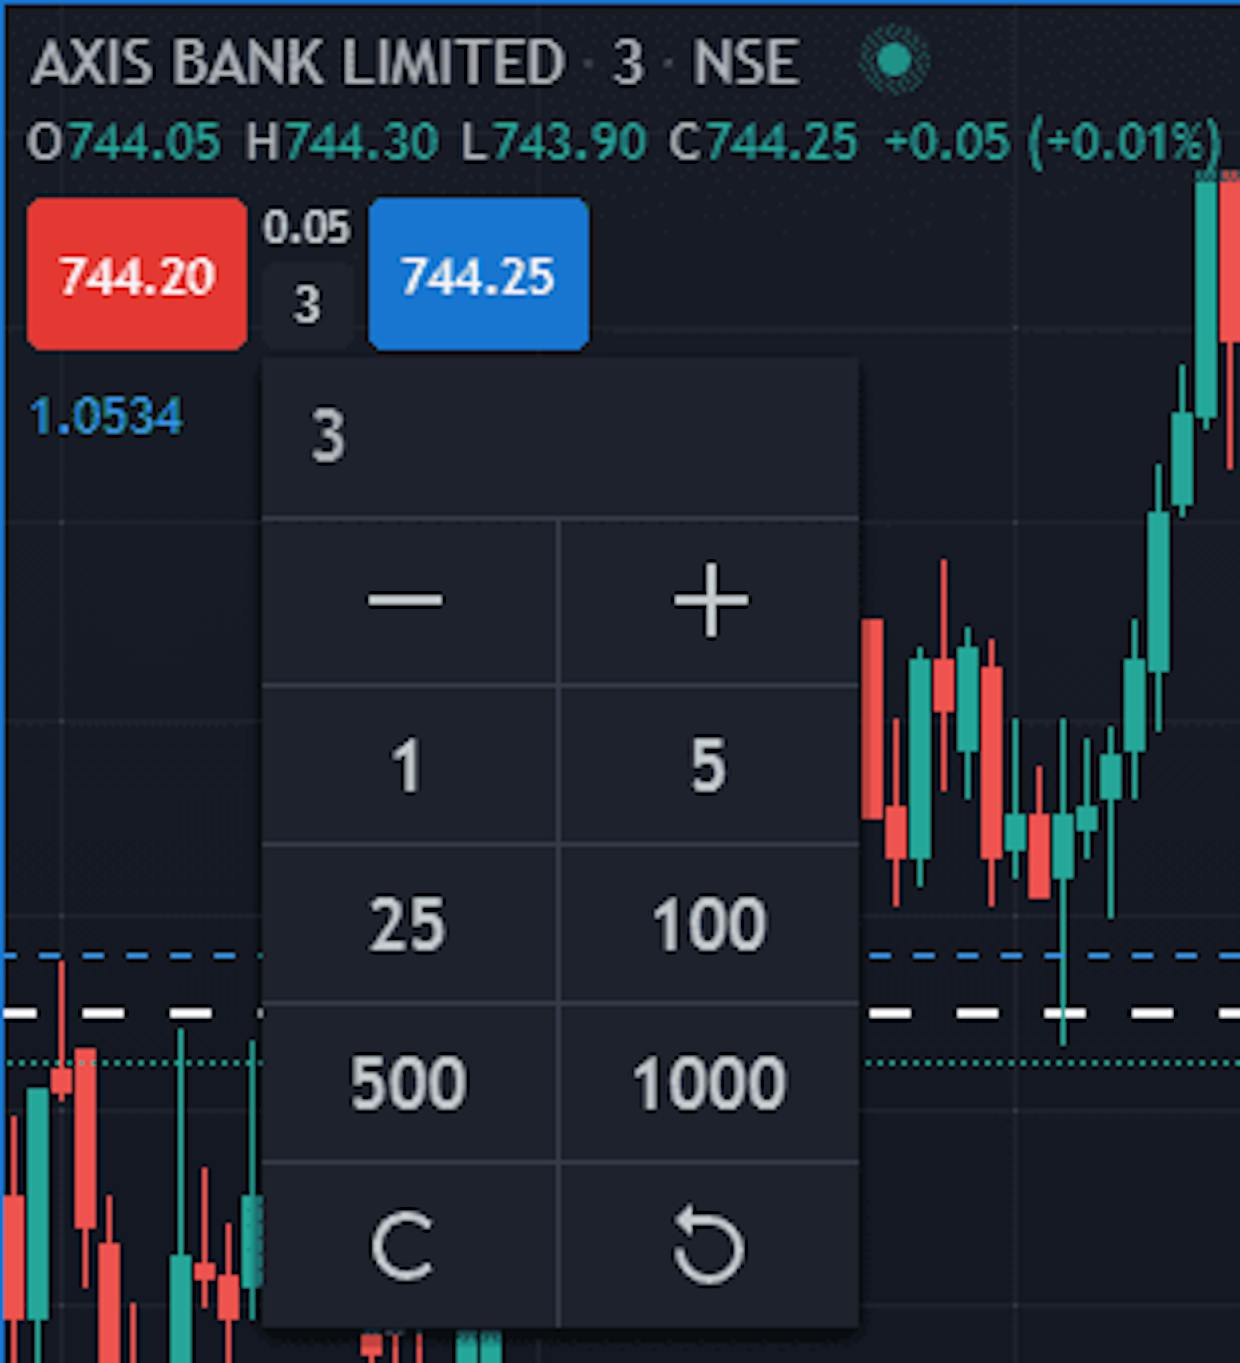 Since yesterday i'm not able to see quantity box in instant buy/sell button on the chart, is it me only or did fyers removed the feature, also i think fyers updated there trading view, and since then some indicators are not working as earlier , e.g in case of pivot point , every time i change the script i have to refresh the page to see the pivot point levels.  